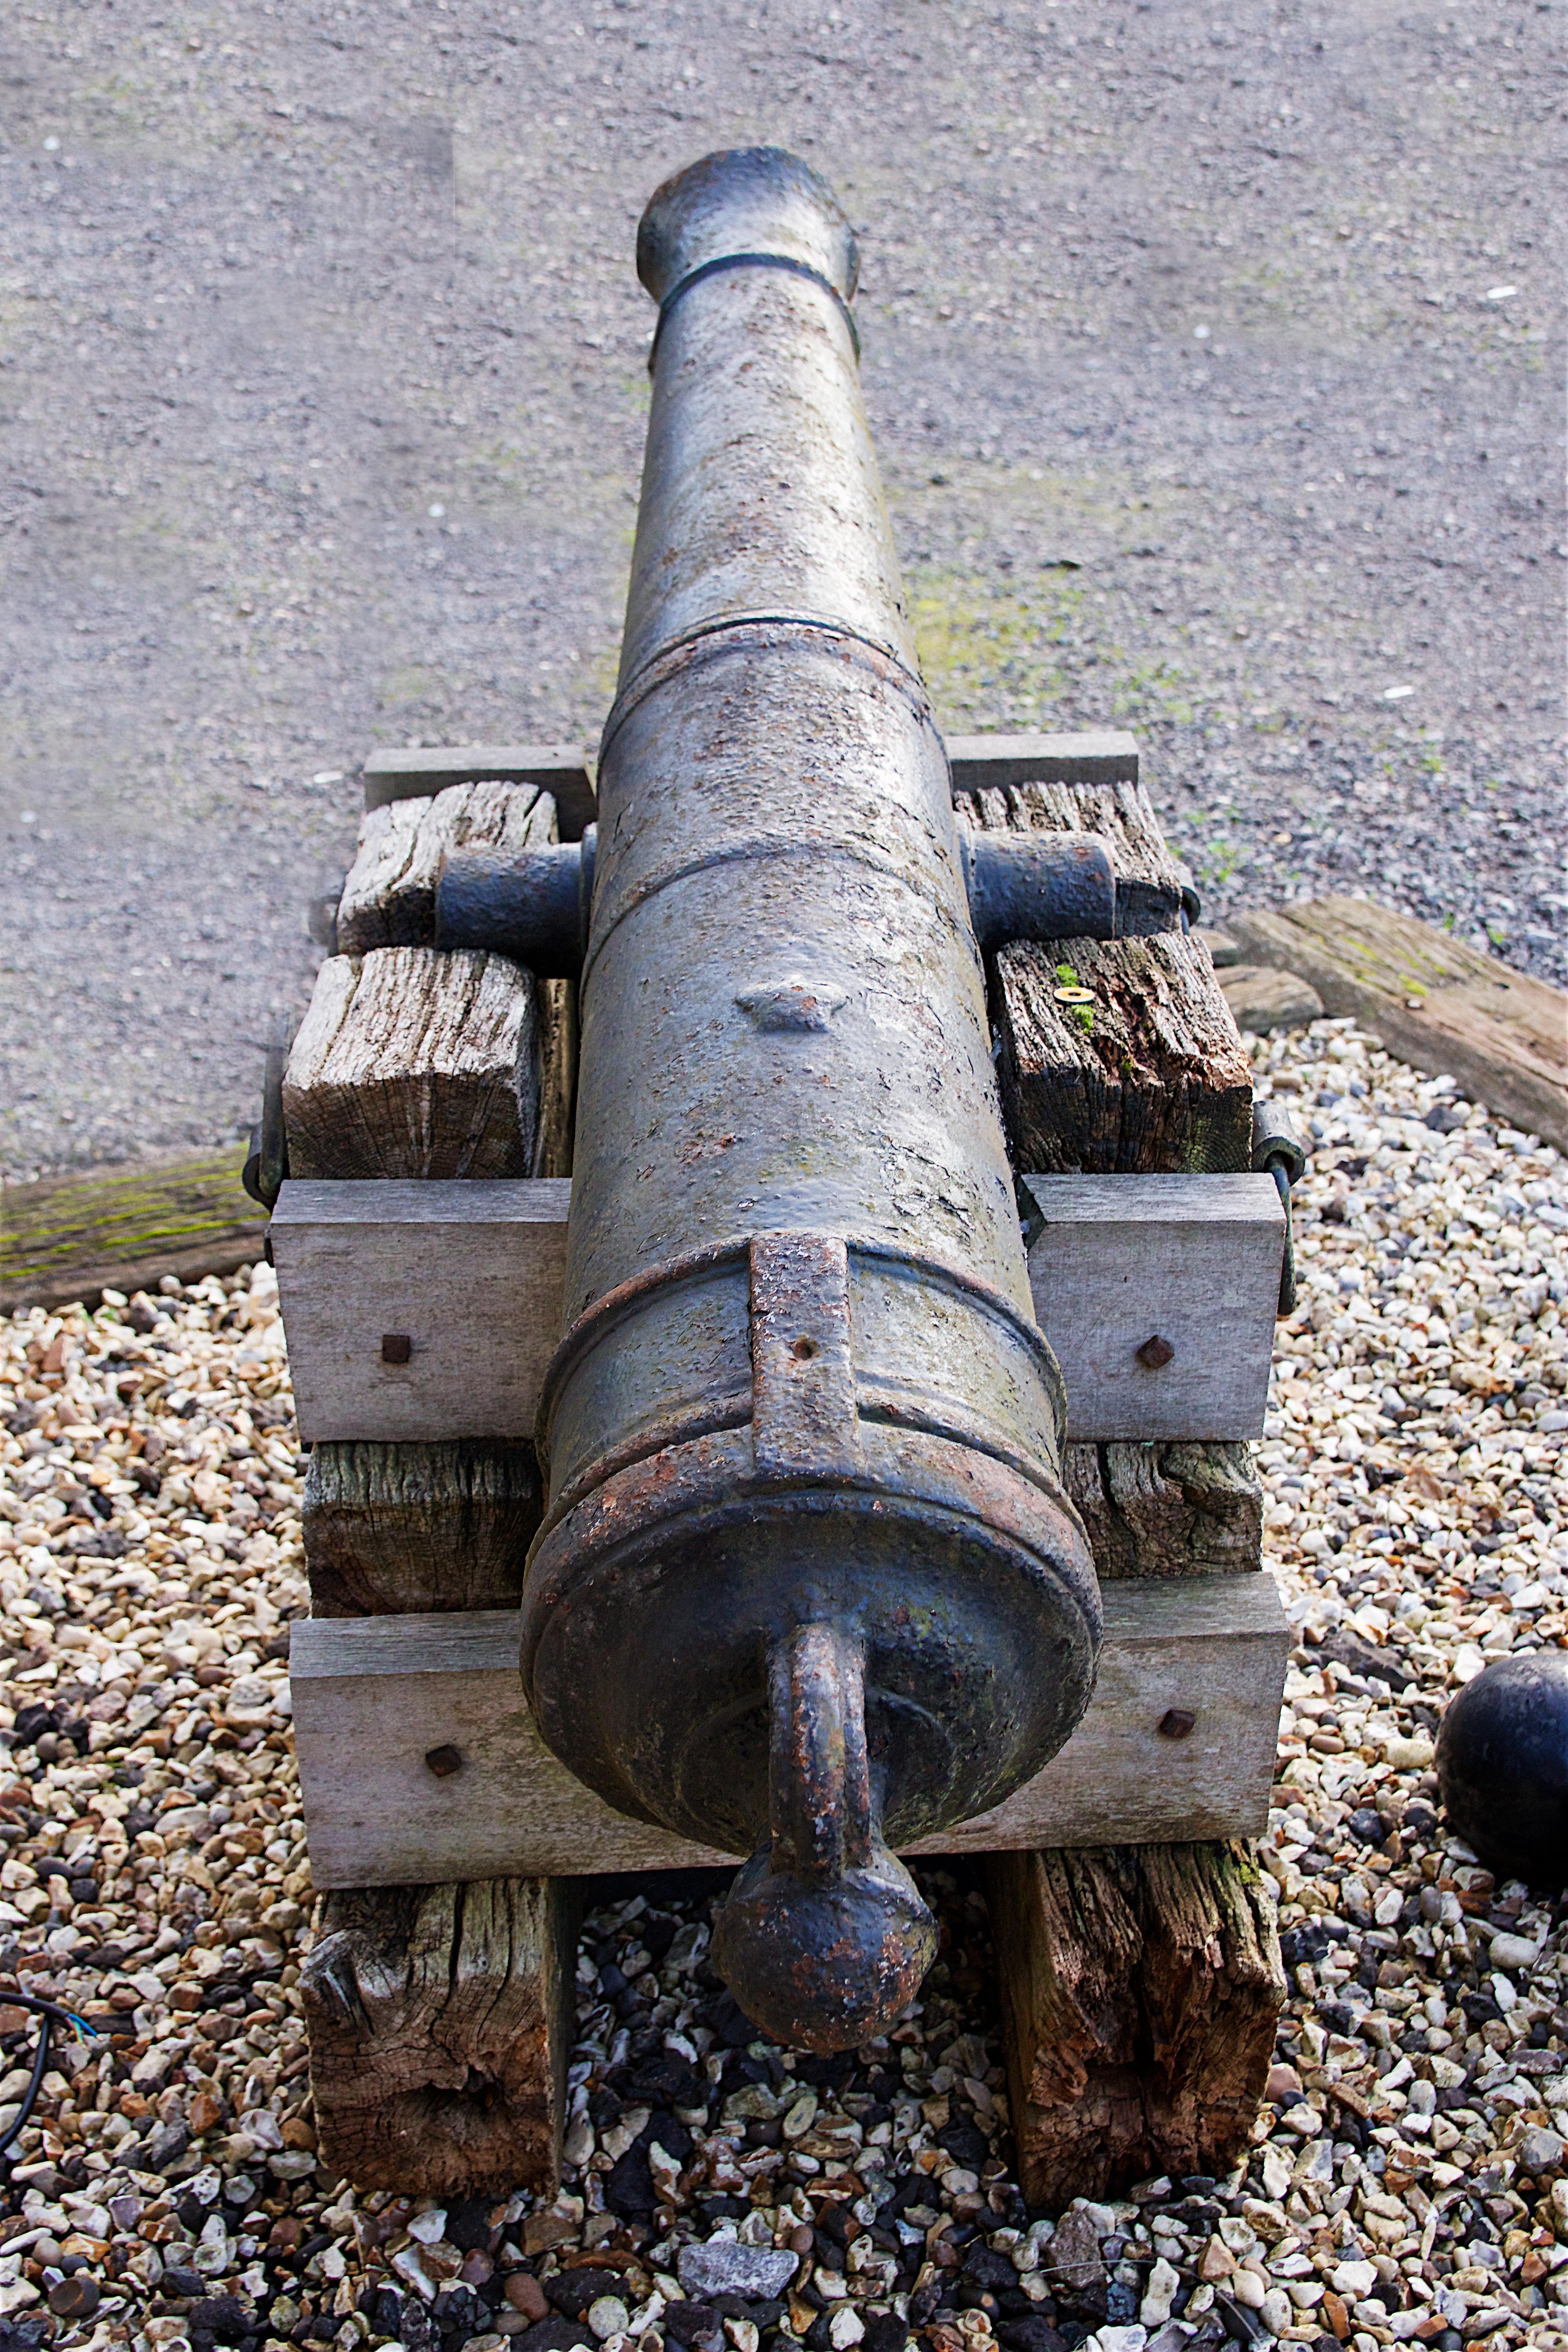 Early 19th century 9 pounder iron ships canon. English, circa 1805
Measures: Barrel length 67in
Barrel diameter 12in
Plinth width 20in.